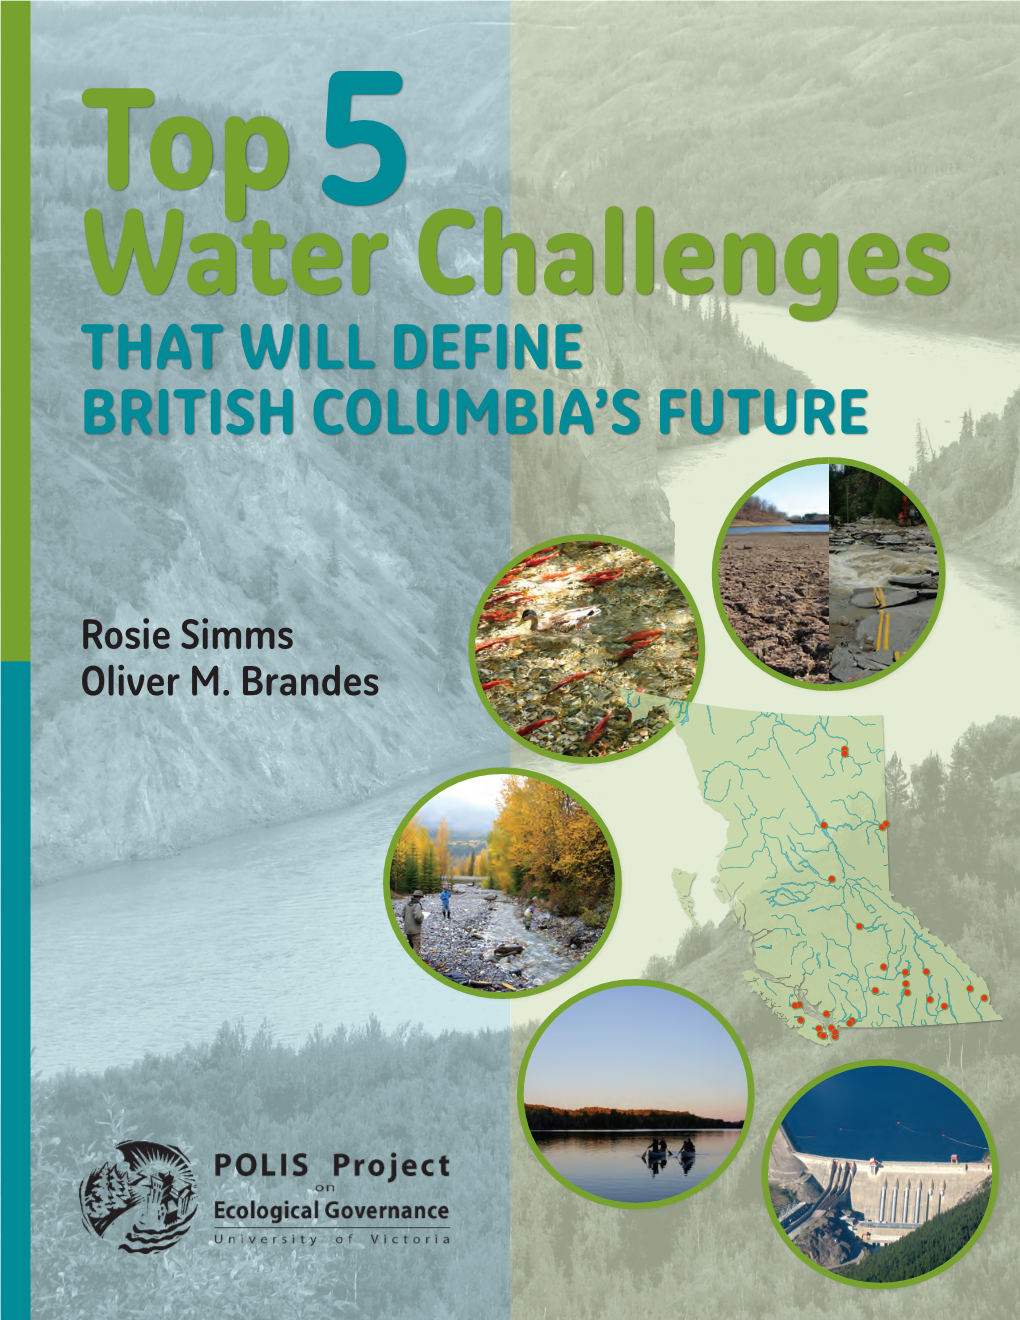 Top 5 Water Challenges That Will Define British Columbia's Future